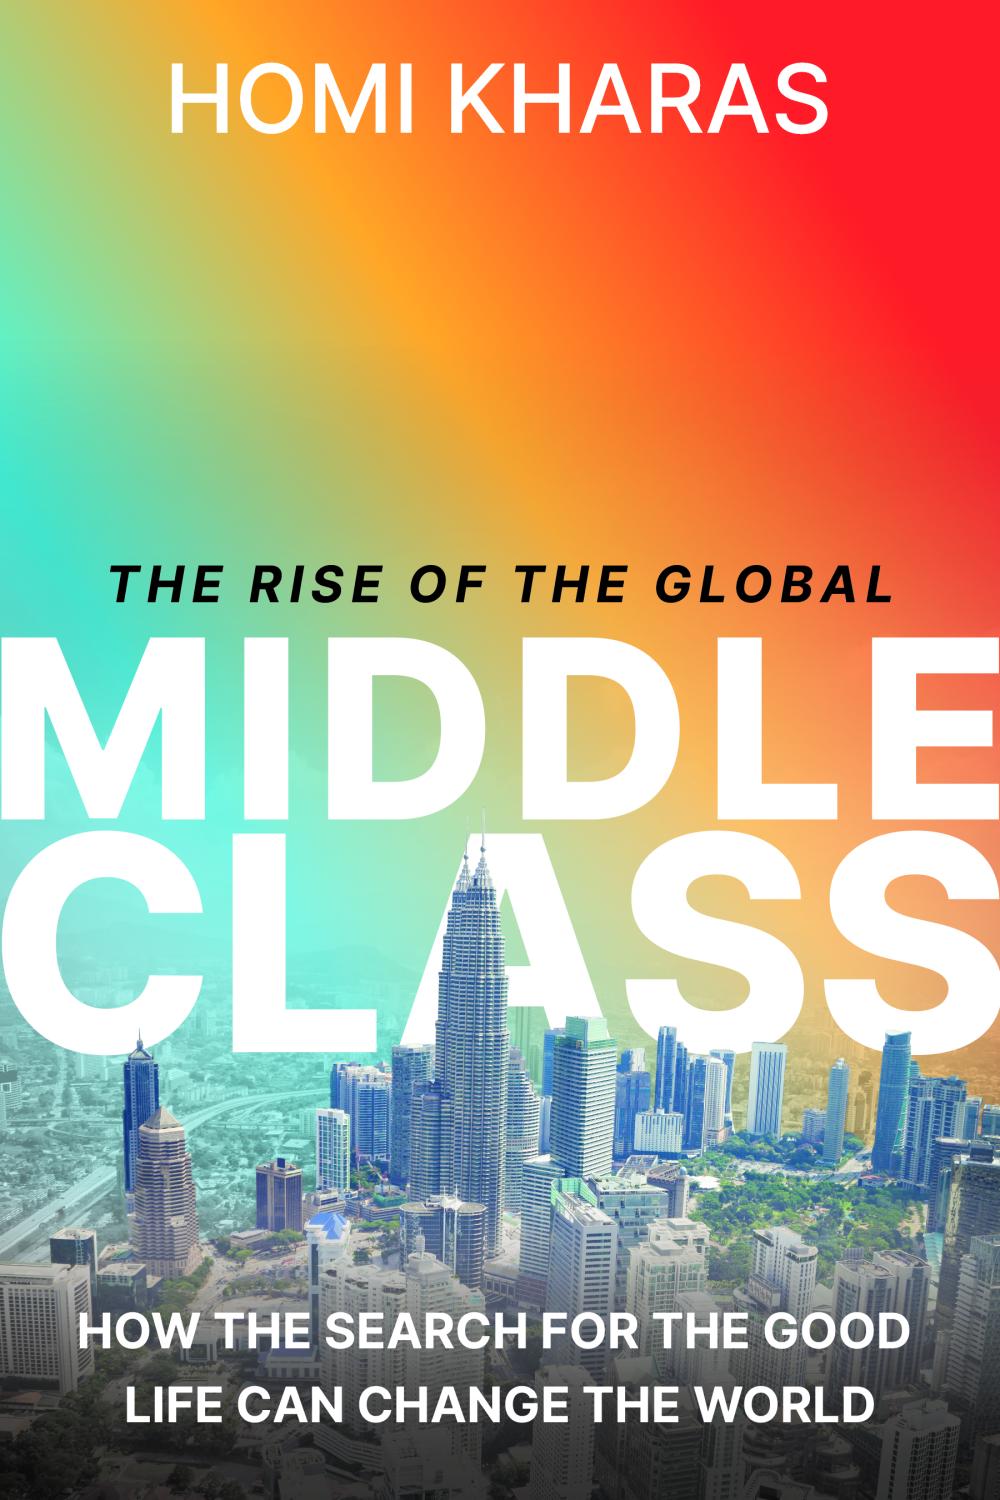 The Rise of the Global Middle Class